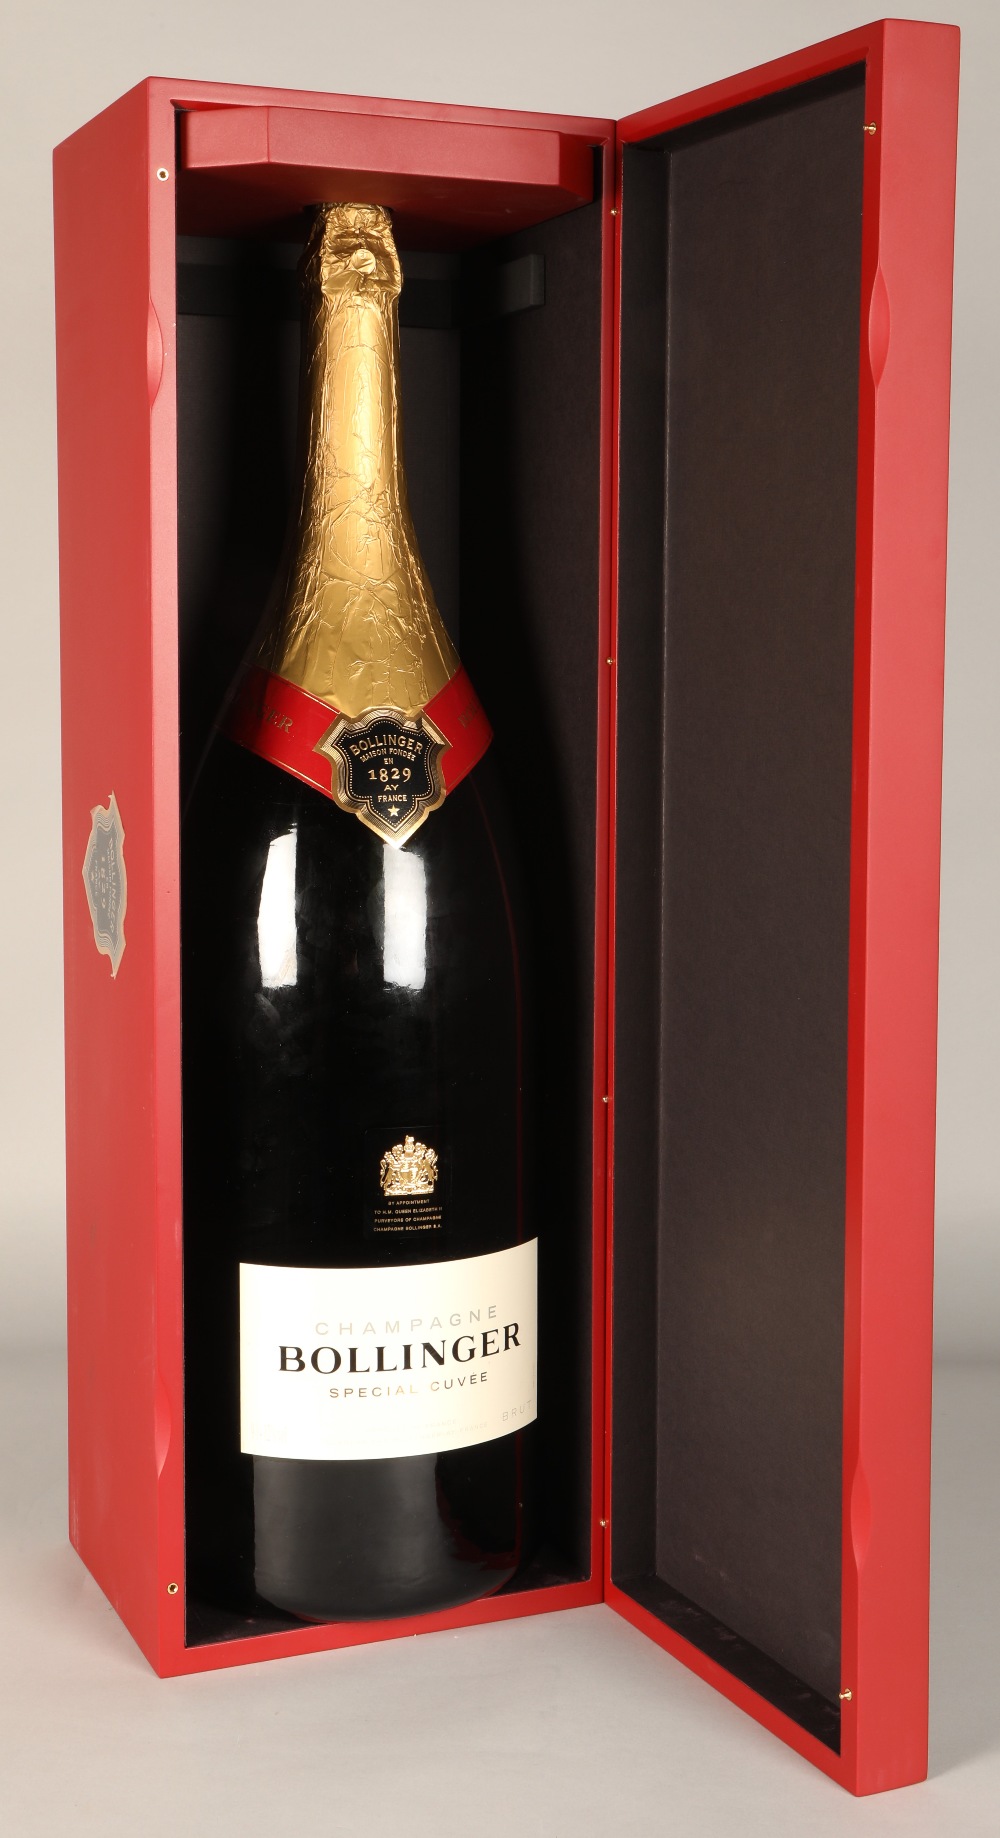 Bollinger Nebuchadnezzar (15 ltr), labelled 'Champagne Bollinger Special Cuvee 91-12% vol in red box - Image 2 of 5